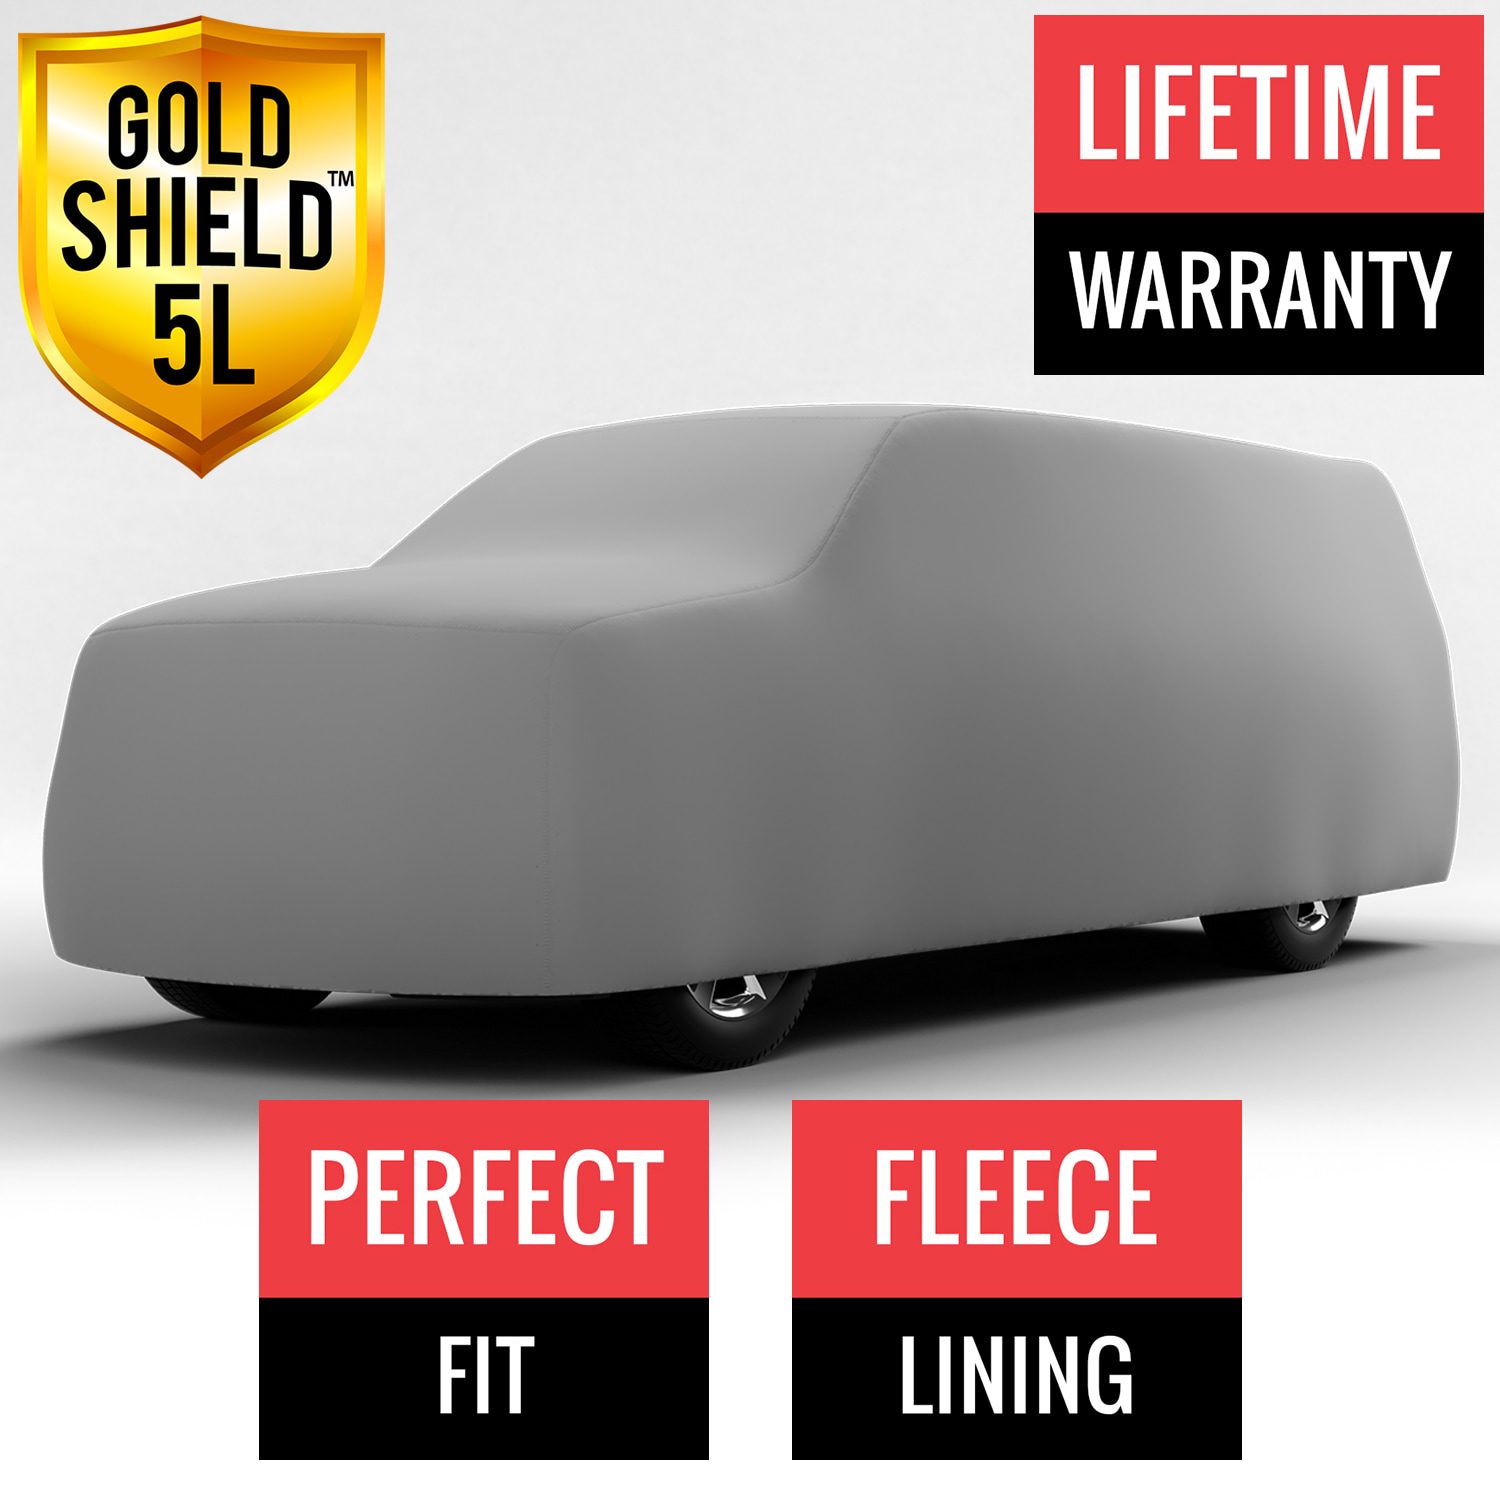 Gold Shield 5L - Car Cover for GMC C1500 1998 Regular Cab Pickup 8.0 Feet Bed with Camper Shell